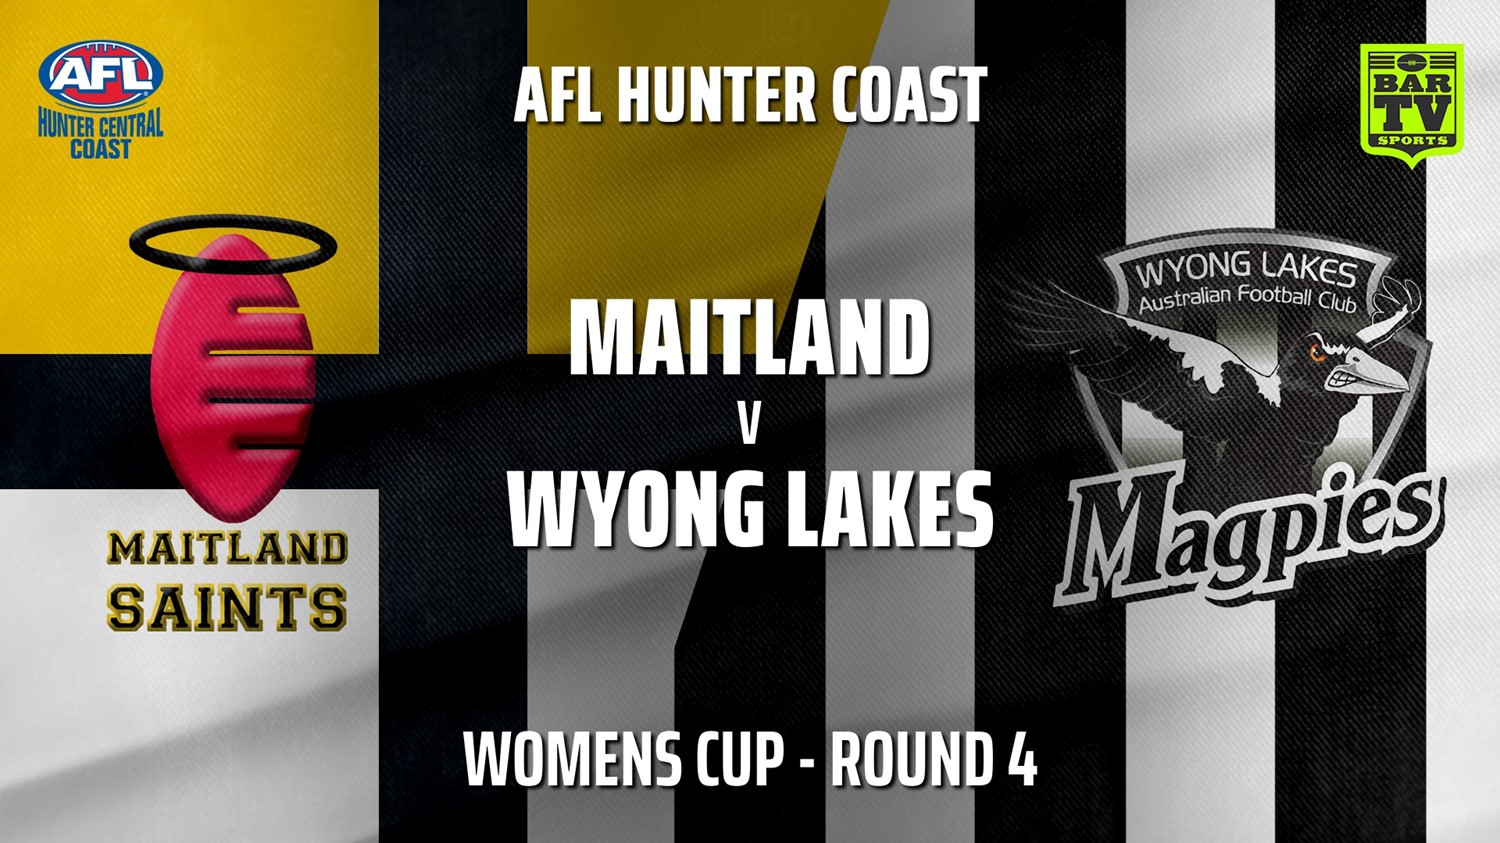 210501-AFL HCC Round 4 - Womens Cup - Maitland Saints v Wyong Lakes Magpies Minigame Slate Image